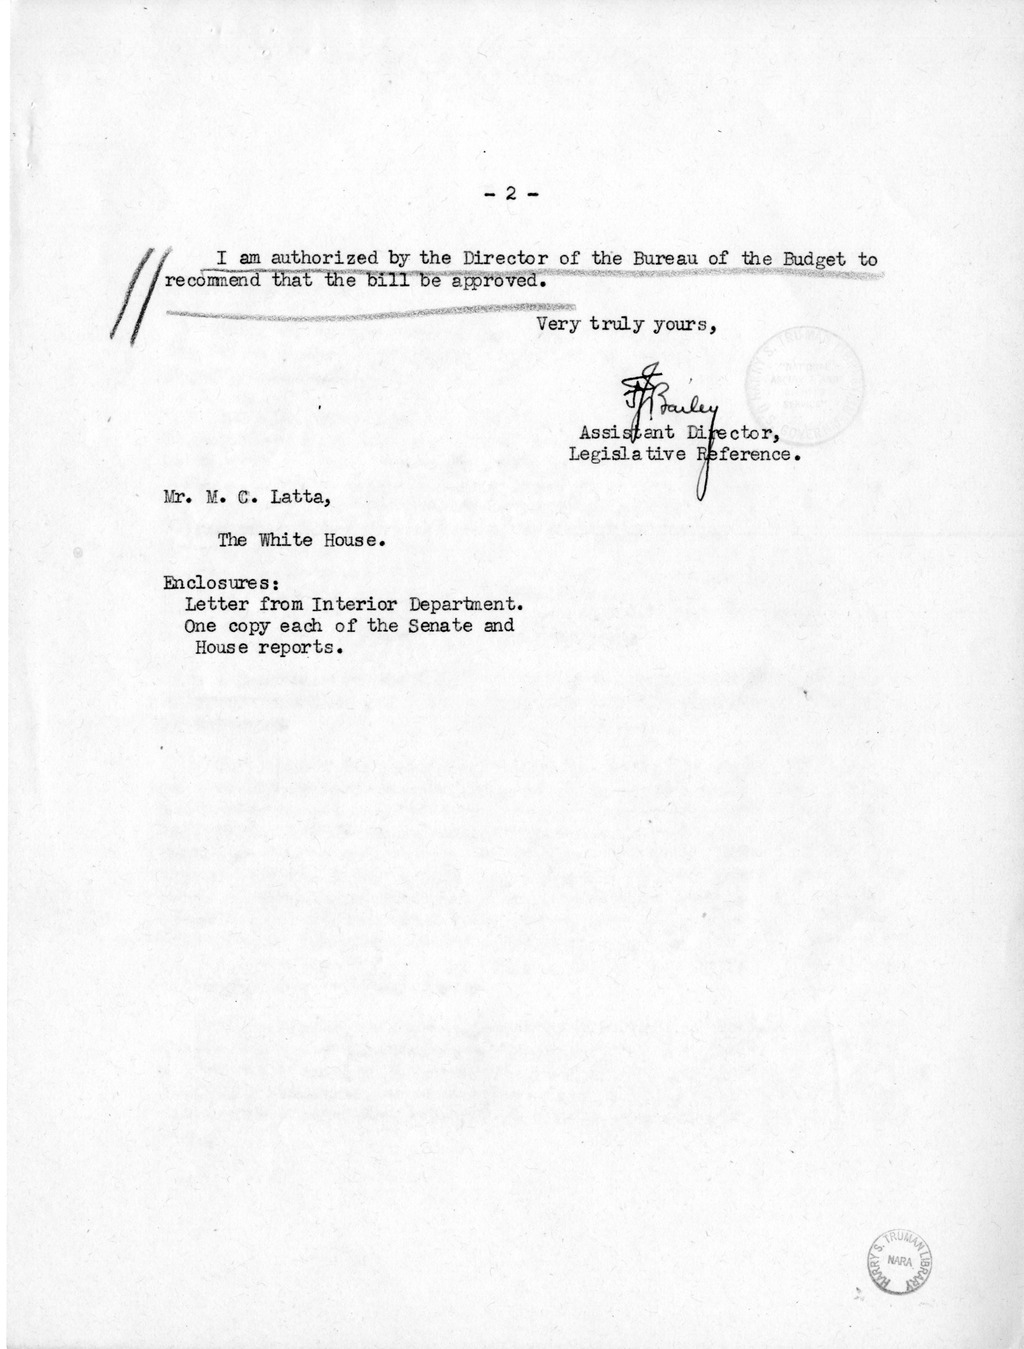 Memorandum from Frederick J. Bailey to M. C. Latta, S. 131, To Authorize the Conveyance of the United States Fish Hatchery Property at Butte Falls, Oregon, to the State of Oregon, with Attachments